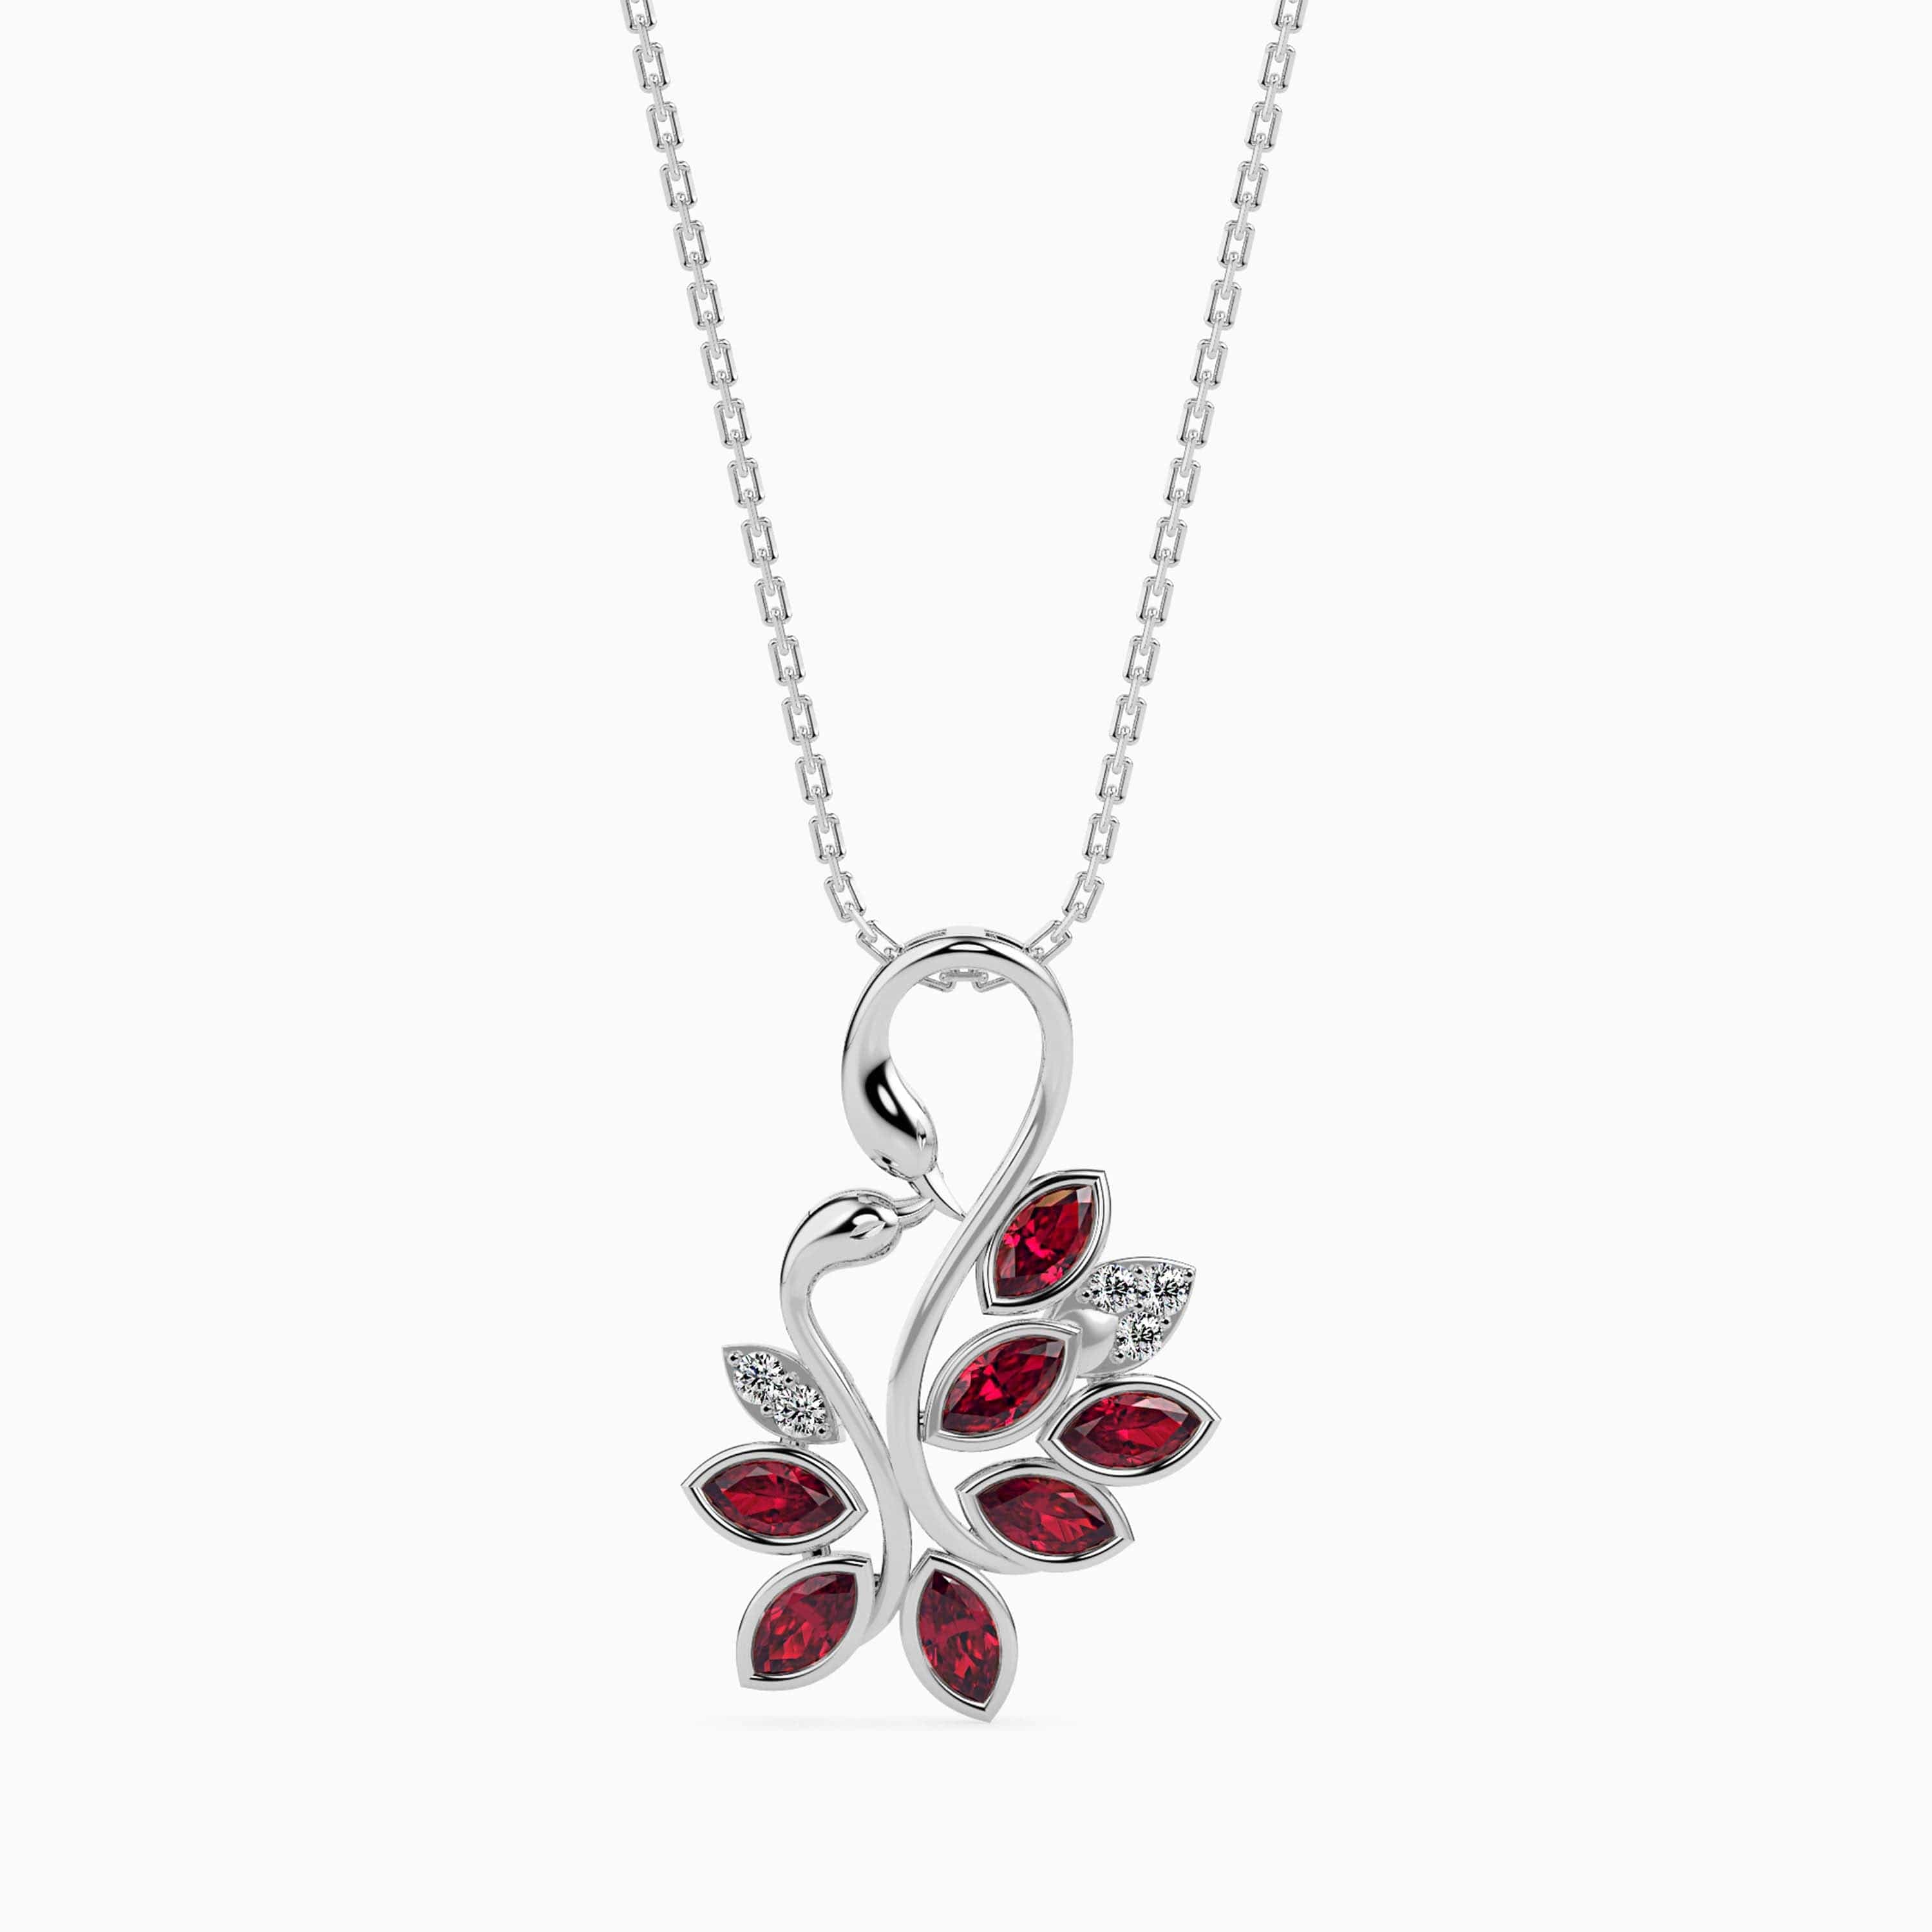 NWT $15, 000 18KT Fancy Large Glittering Fancy Red Ruby Diamond Necklace  For Sale at 1stDibs | red tennis necklace, royal ruby necklace, $15,000